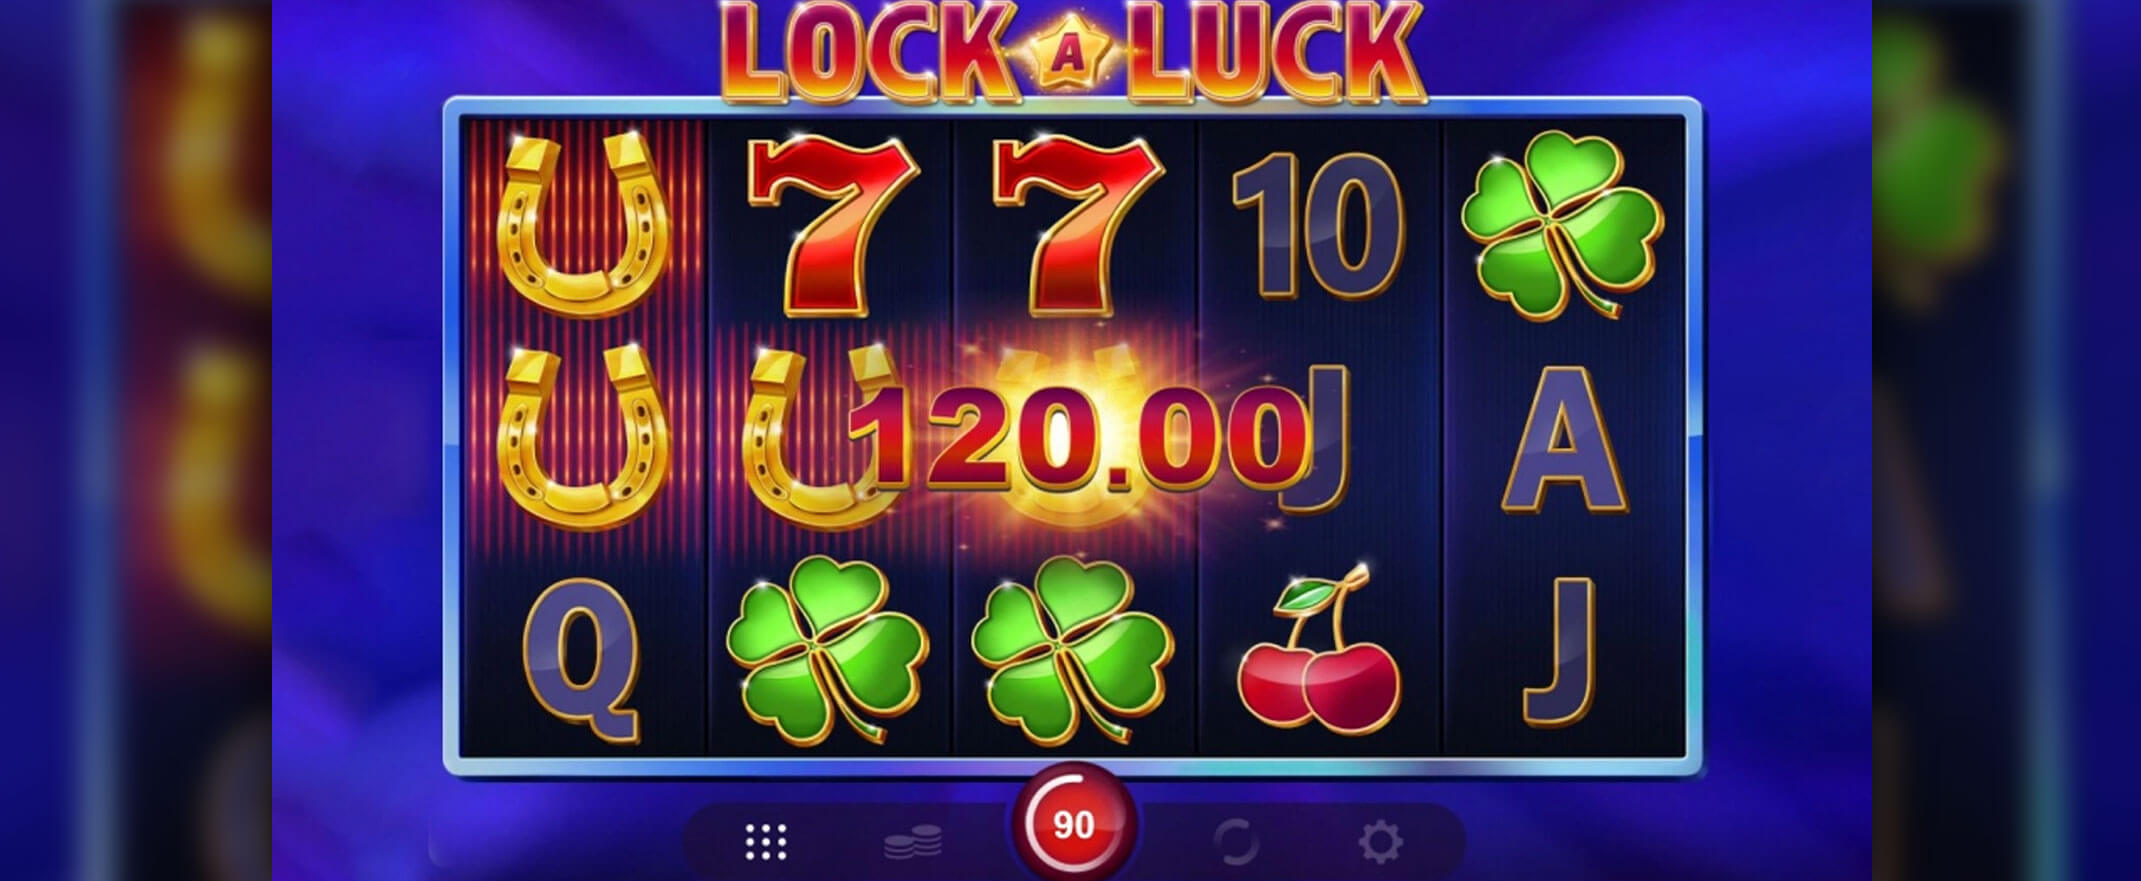 Lock a Luck slot by Microgaming & All41Studios